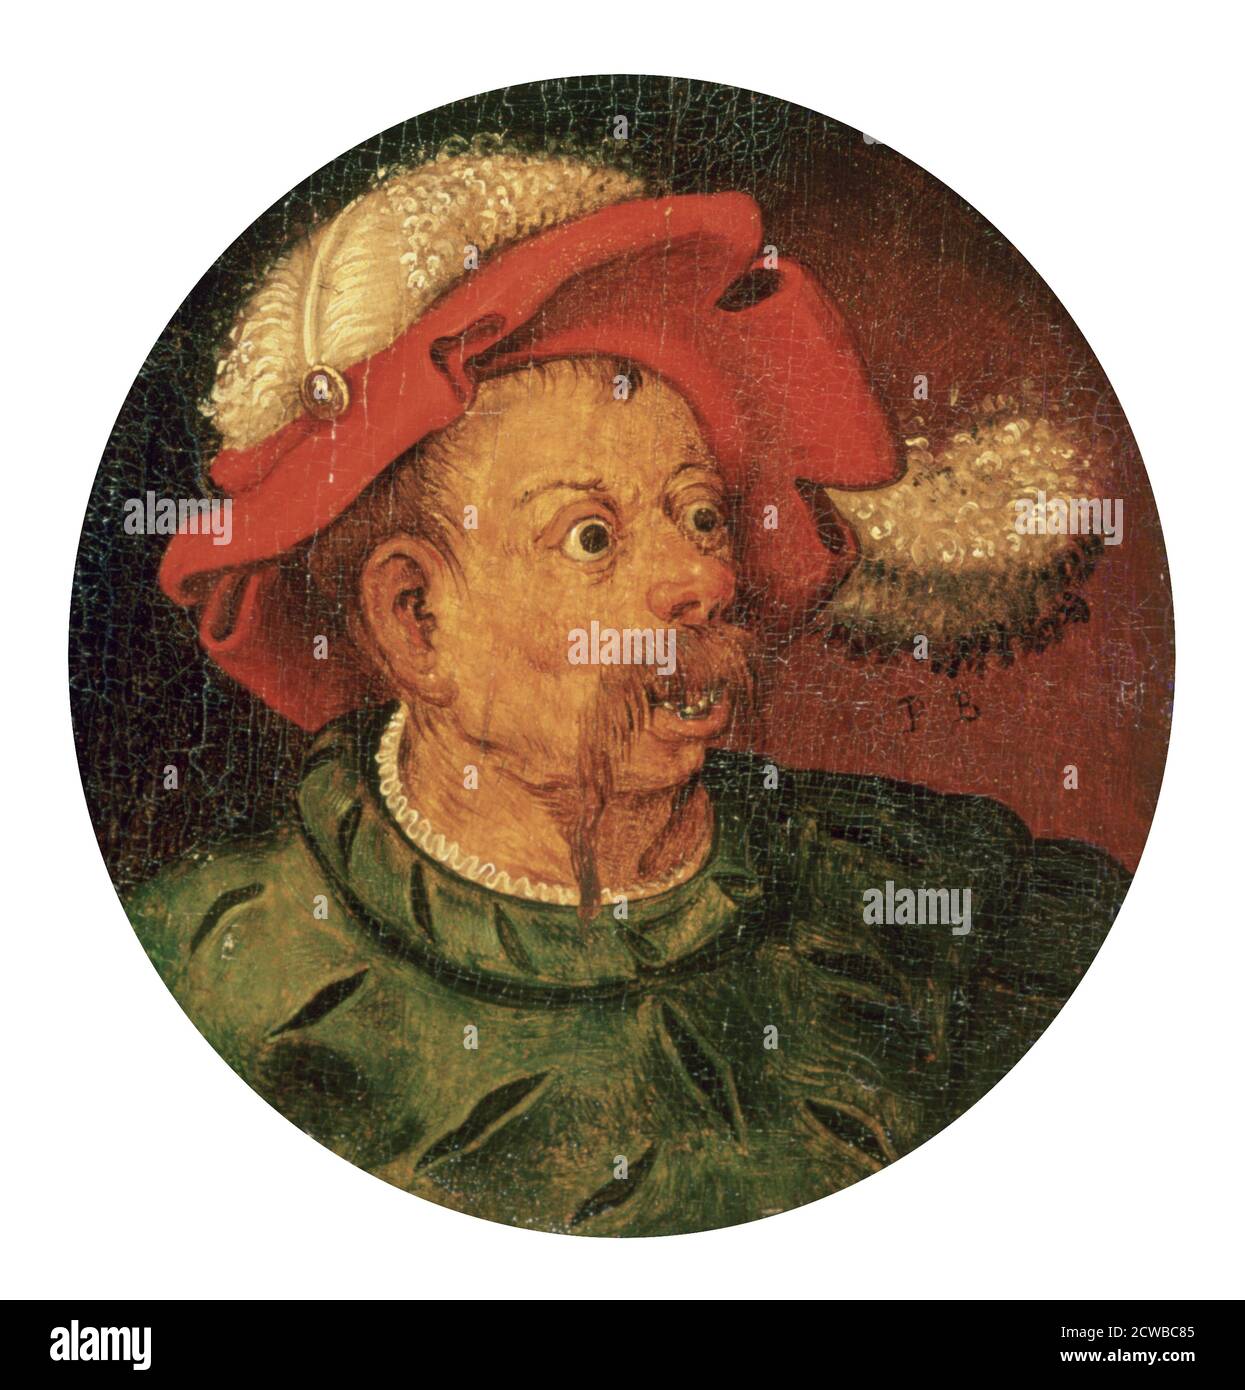 Portrait by Pieter Bruegel the Elder titled 'Head of a Lansquenet', c1545-1569. From the collection of the Musee Fabre, Montpellier, France. Stock Photo